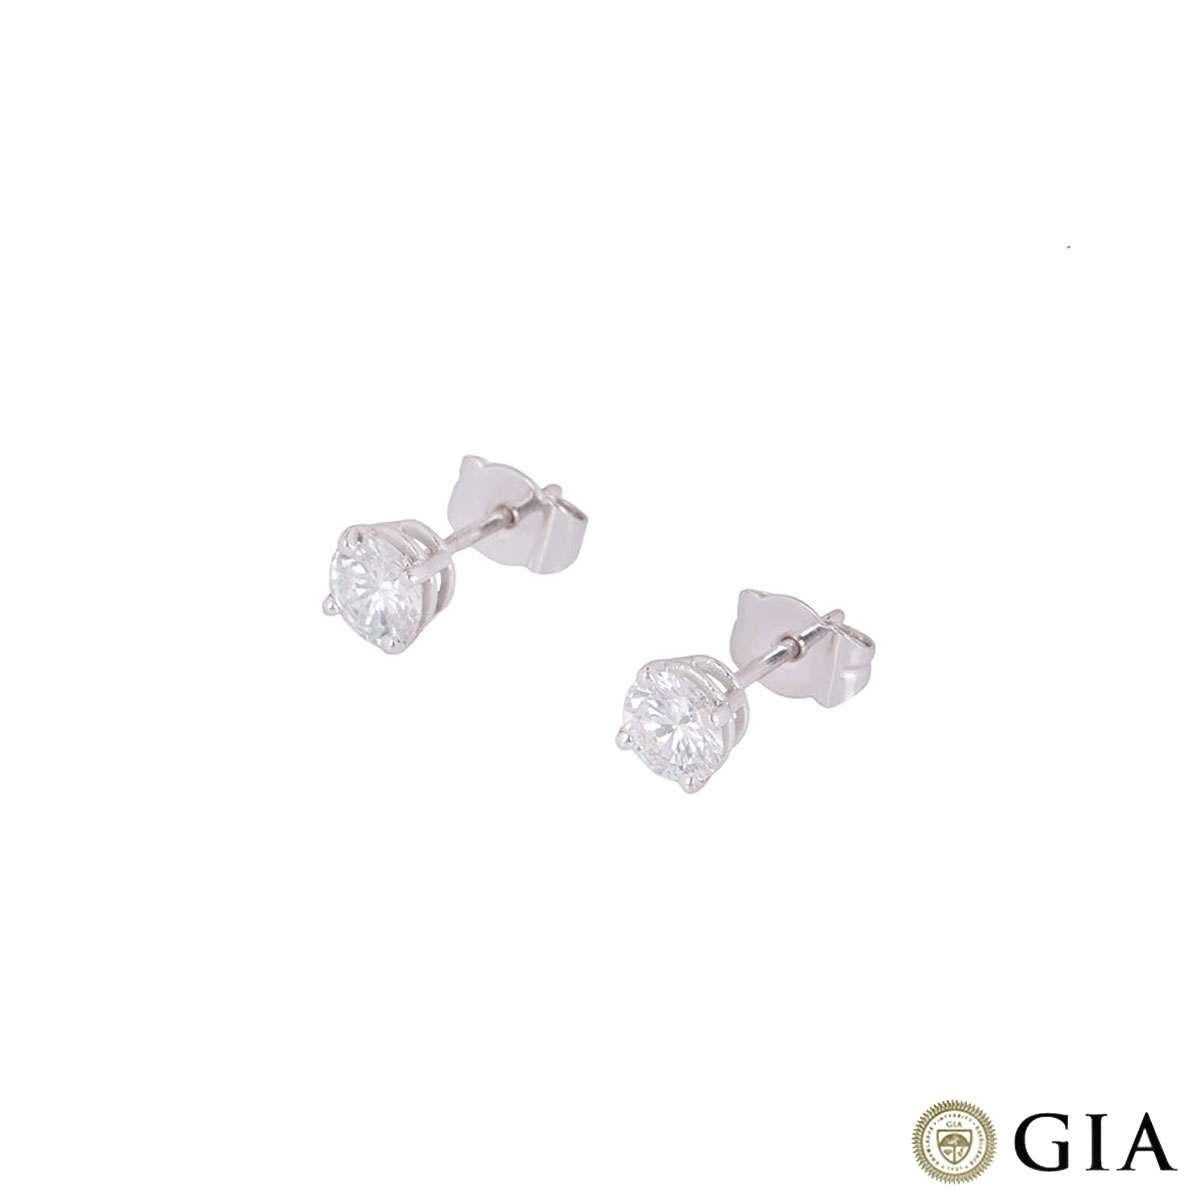 A beautiful pair of 18k white gold diamond stud earrings. The earrings comprise of a single round brilliant cut diamond in a four claw setting, one weighing 0.50ct, G colour and VVS1 in clarity and the other 0.51ct, G colour and VS1 clarity. The